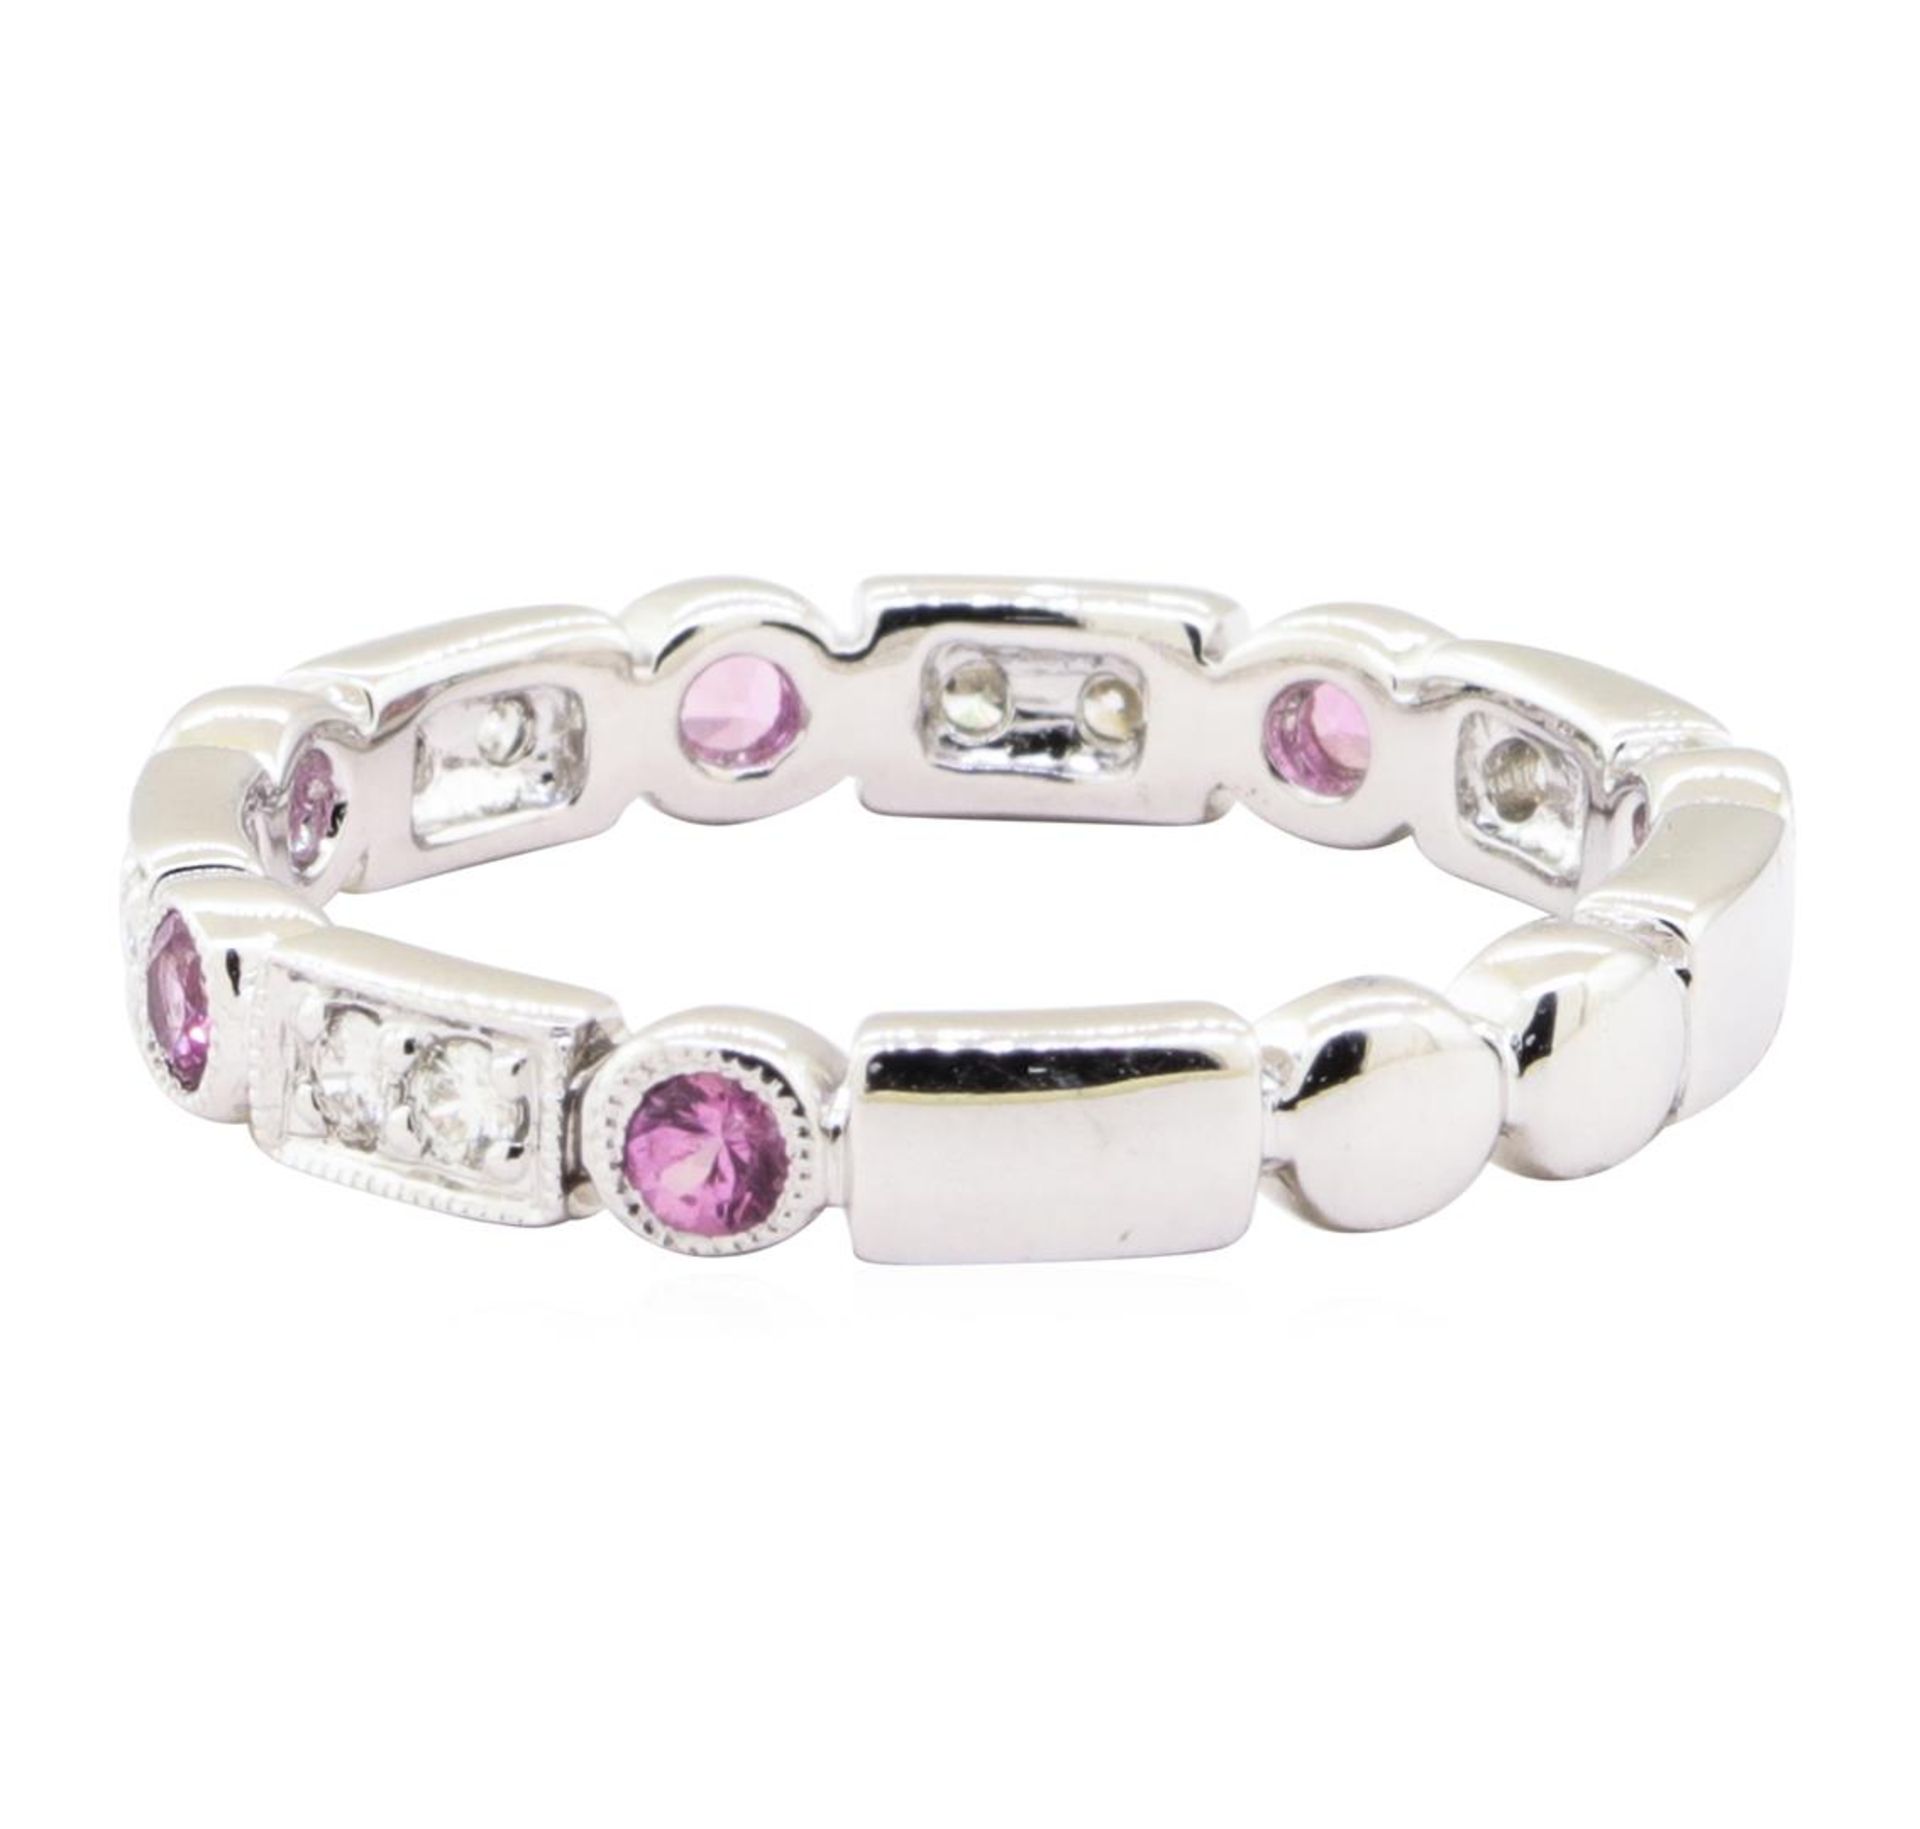 0.55 ctw Pink Sapphire and Diamond Ring - 14KT White Gold - Image 3 of 4